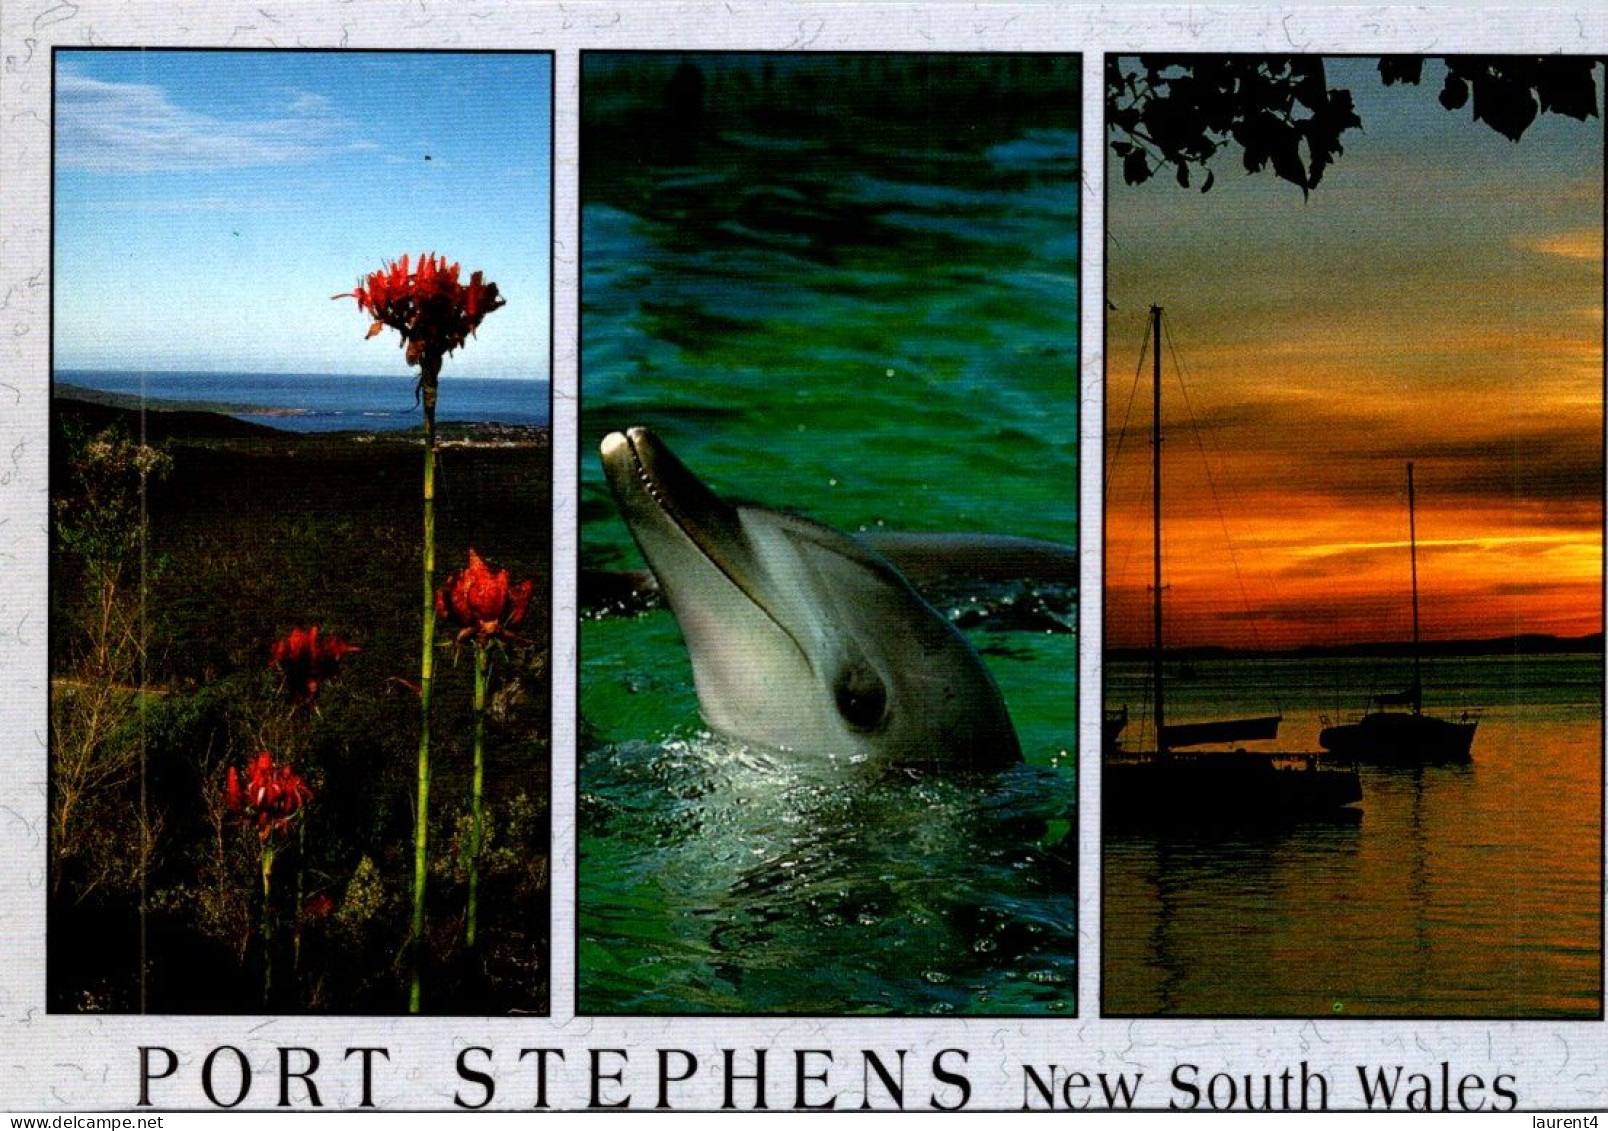 10-5-2024 (4 Z 36) Australia - NSW - Port Stephens & Dolphin (posted With Rose Stamp In 1997) - Dauphins